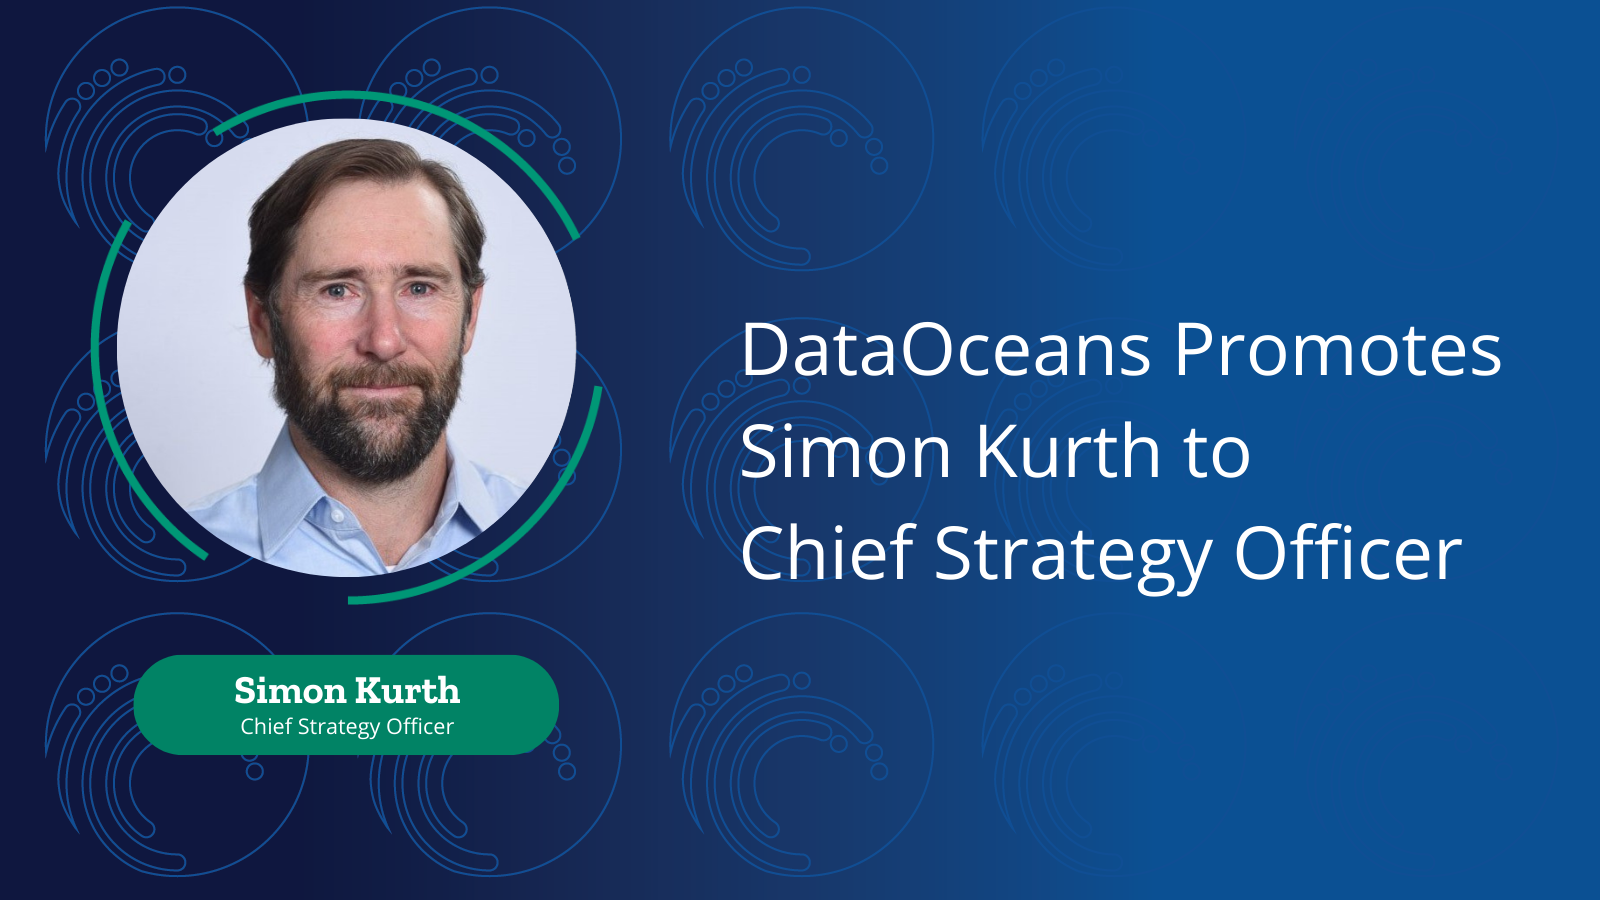 DataOceans Promotes Simon Kurth to Chief Strategy Officer